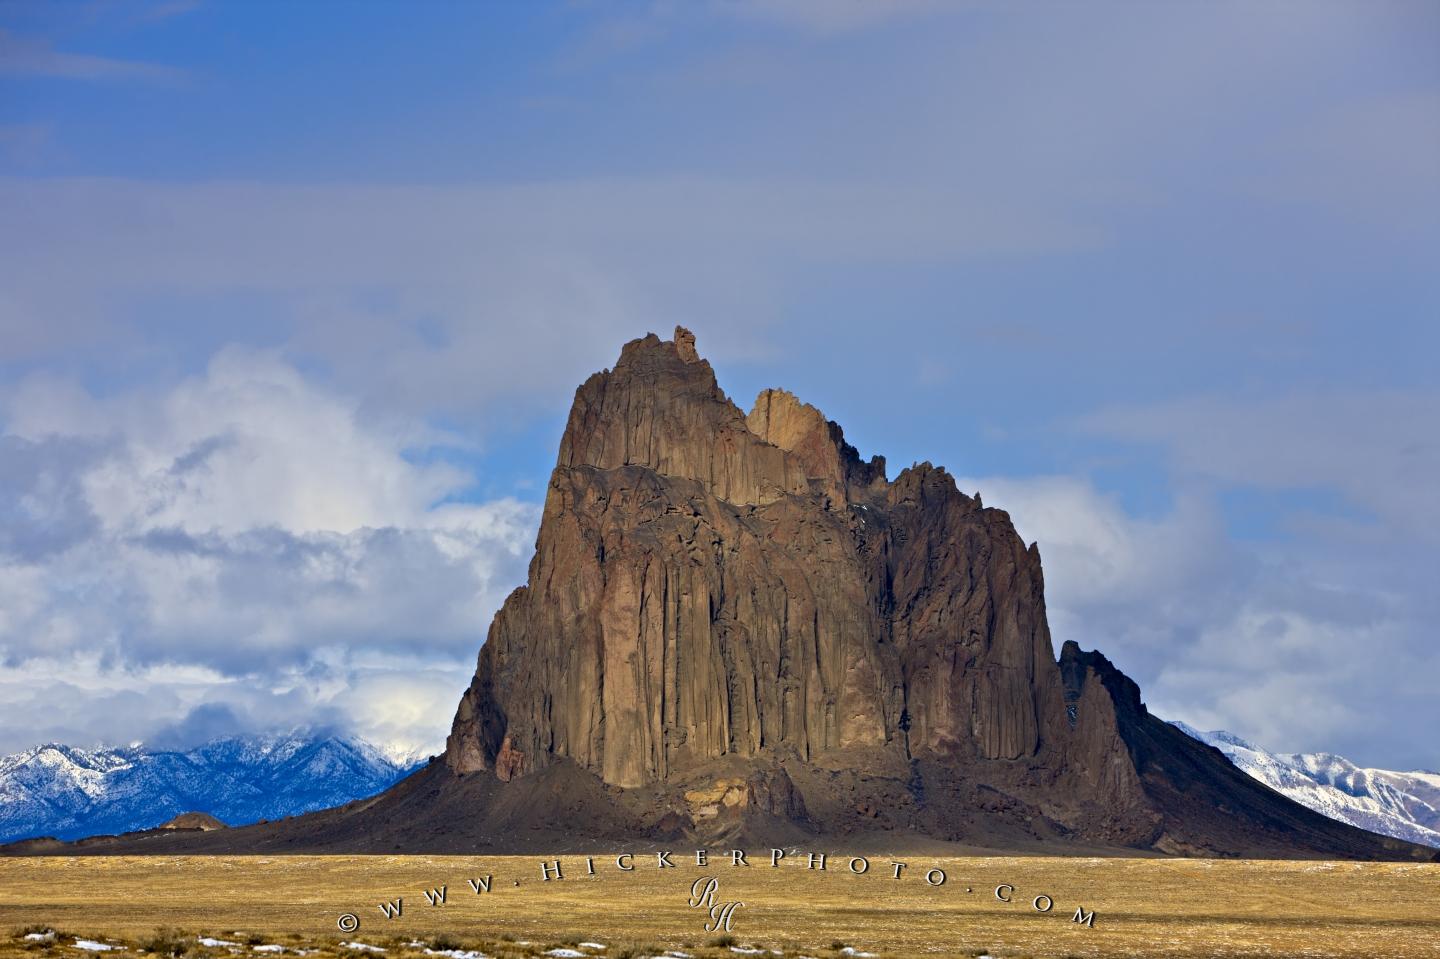 Free wallpaper background: Shiprock Formation New Mexico